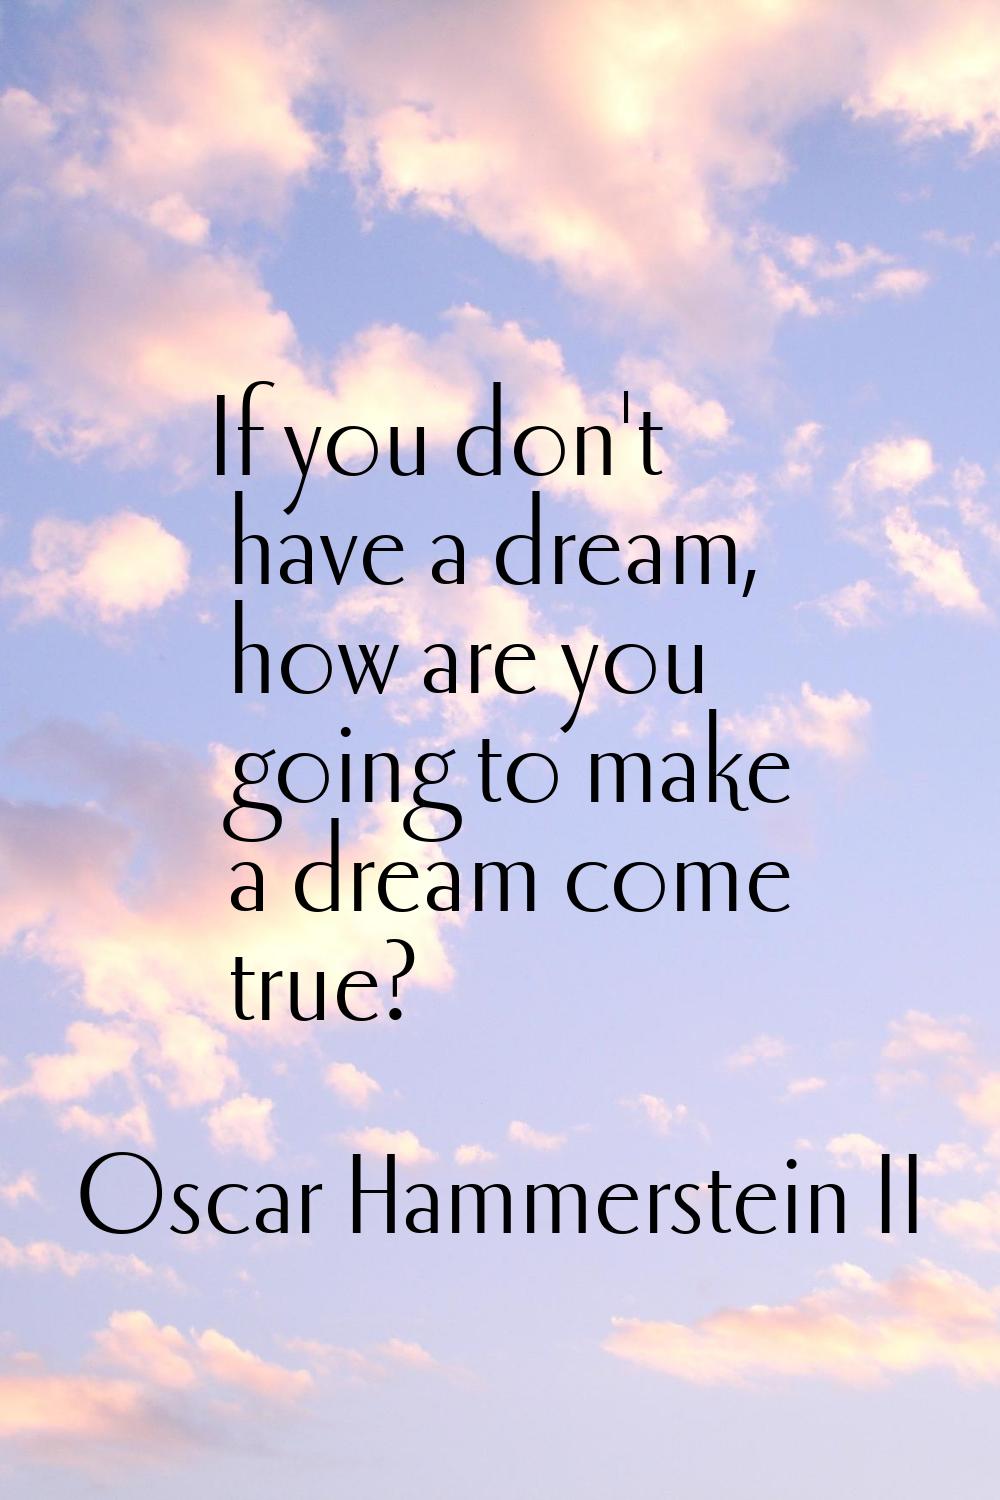 If you don't have a dream, how are you going to make a dream come true?